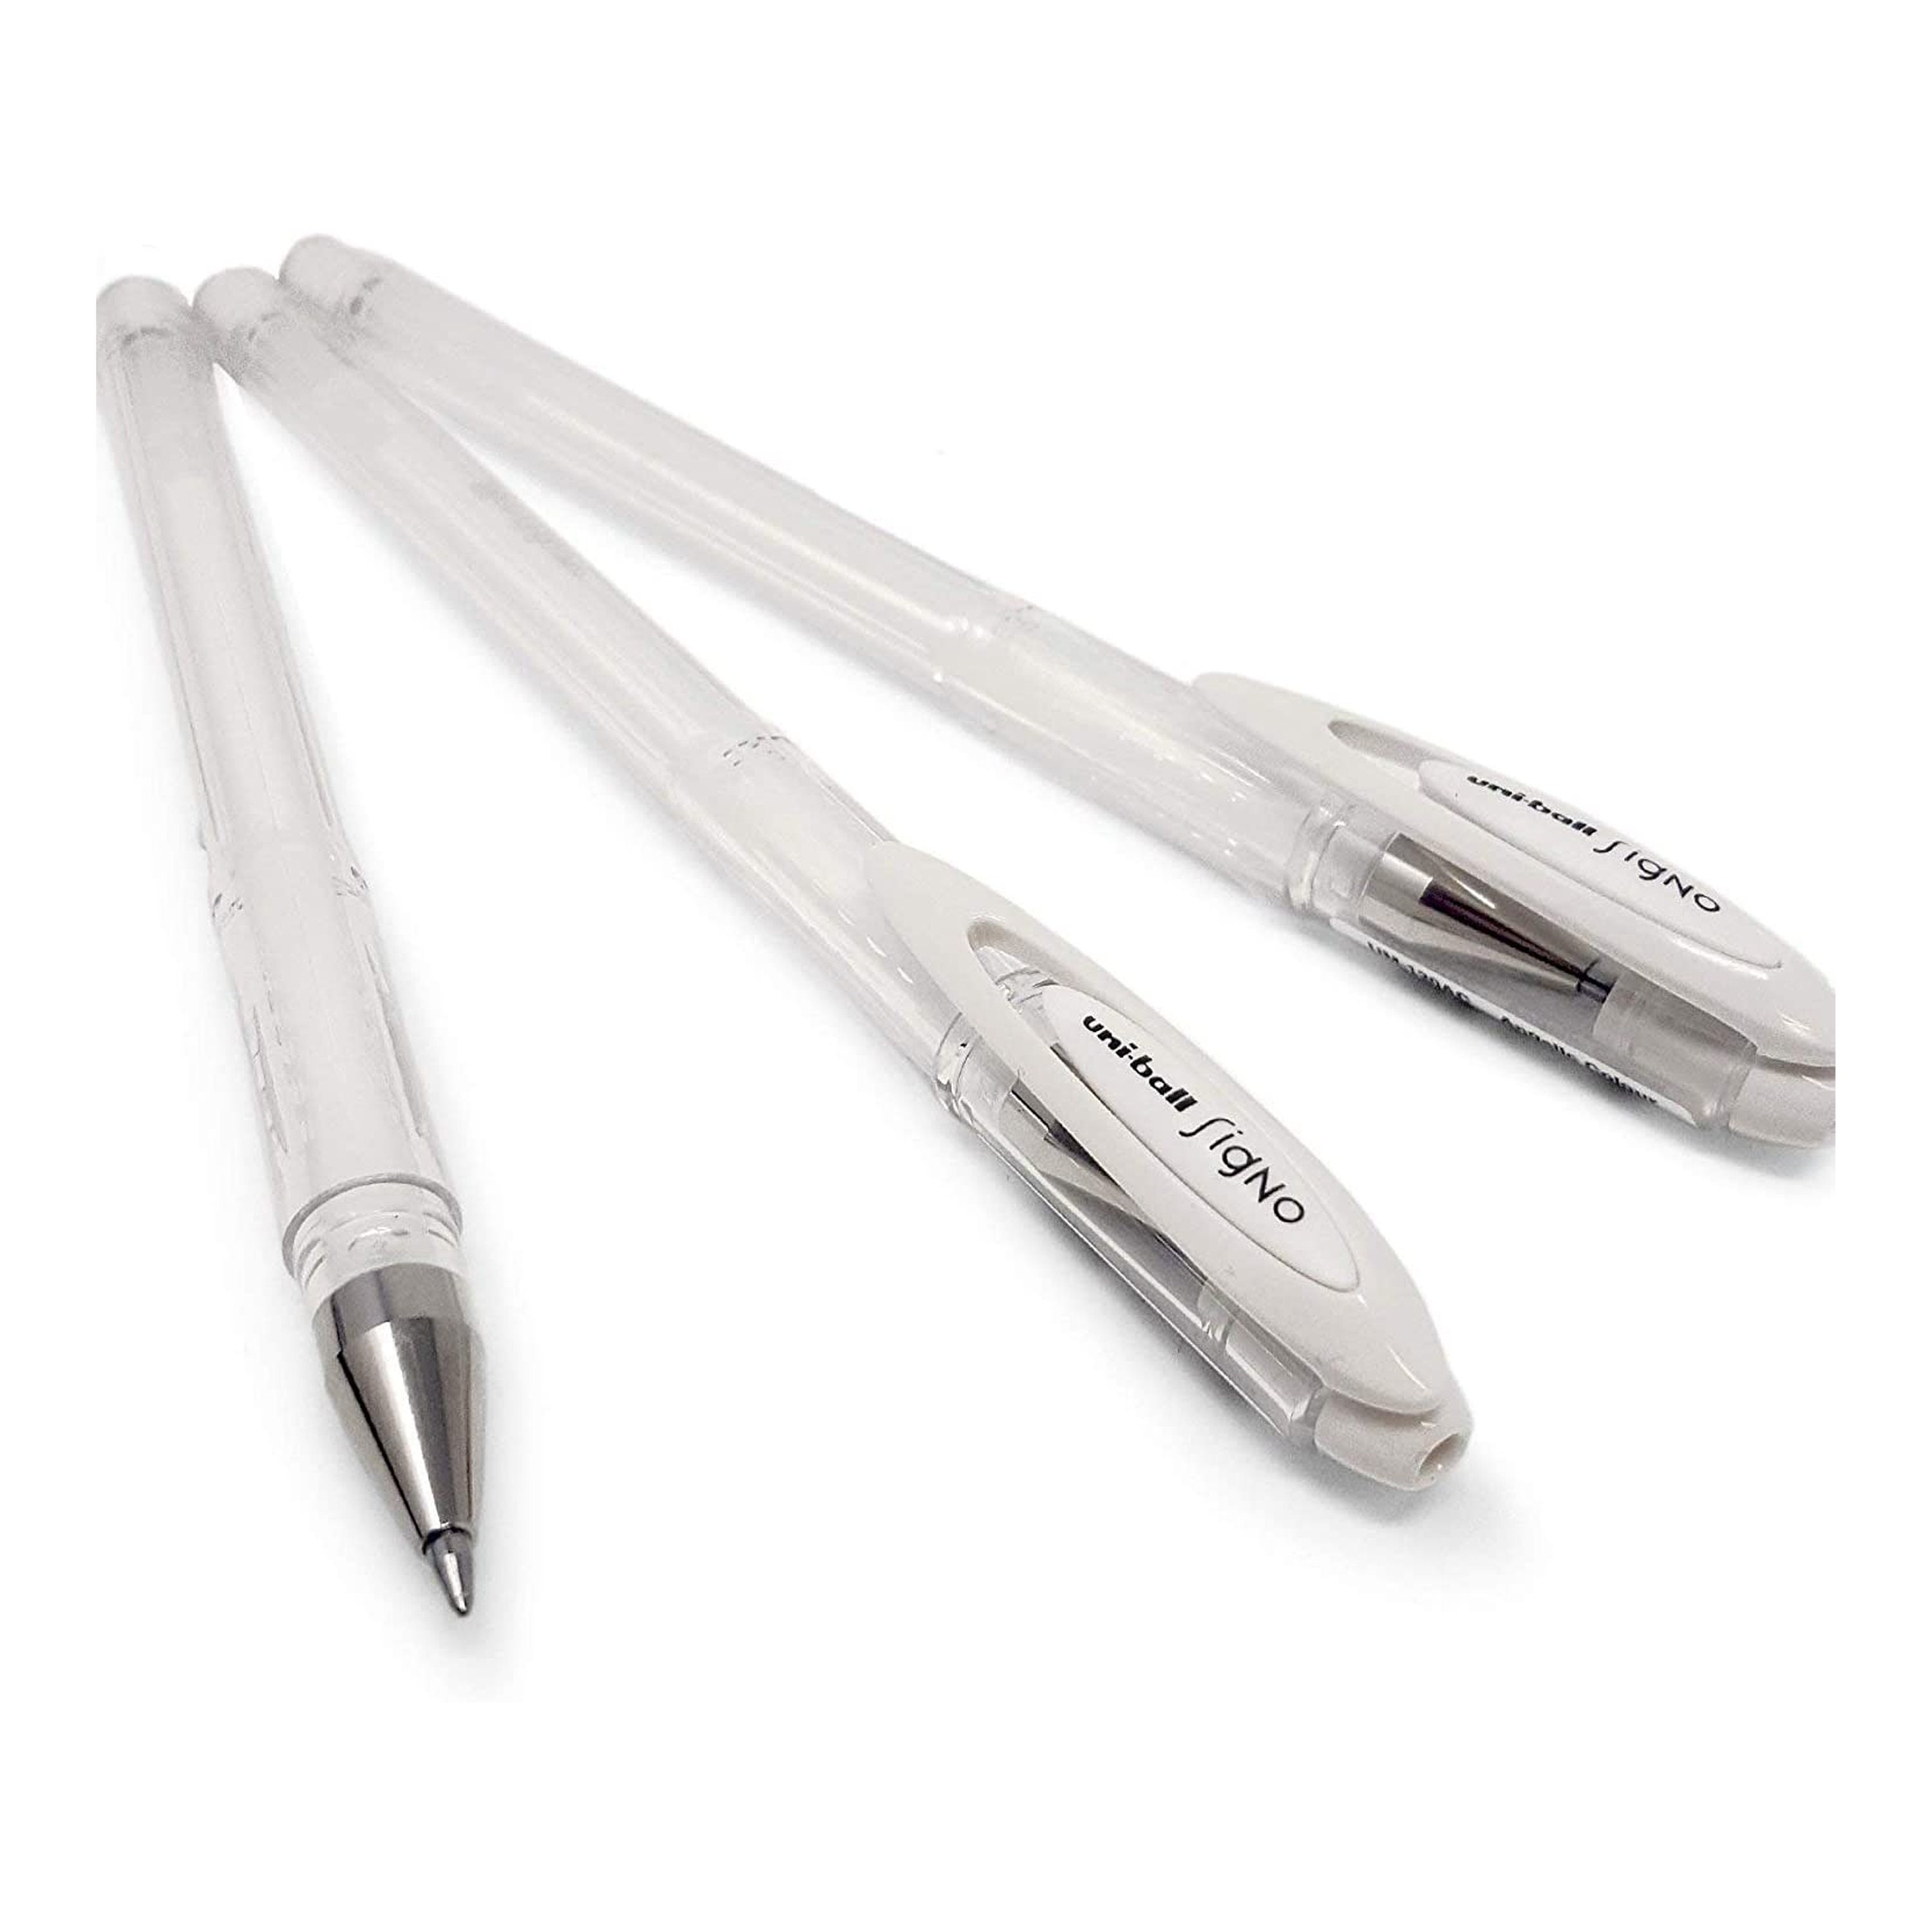 Shop Uniball Signo White Gel Pen with great discounts and prices